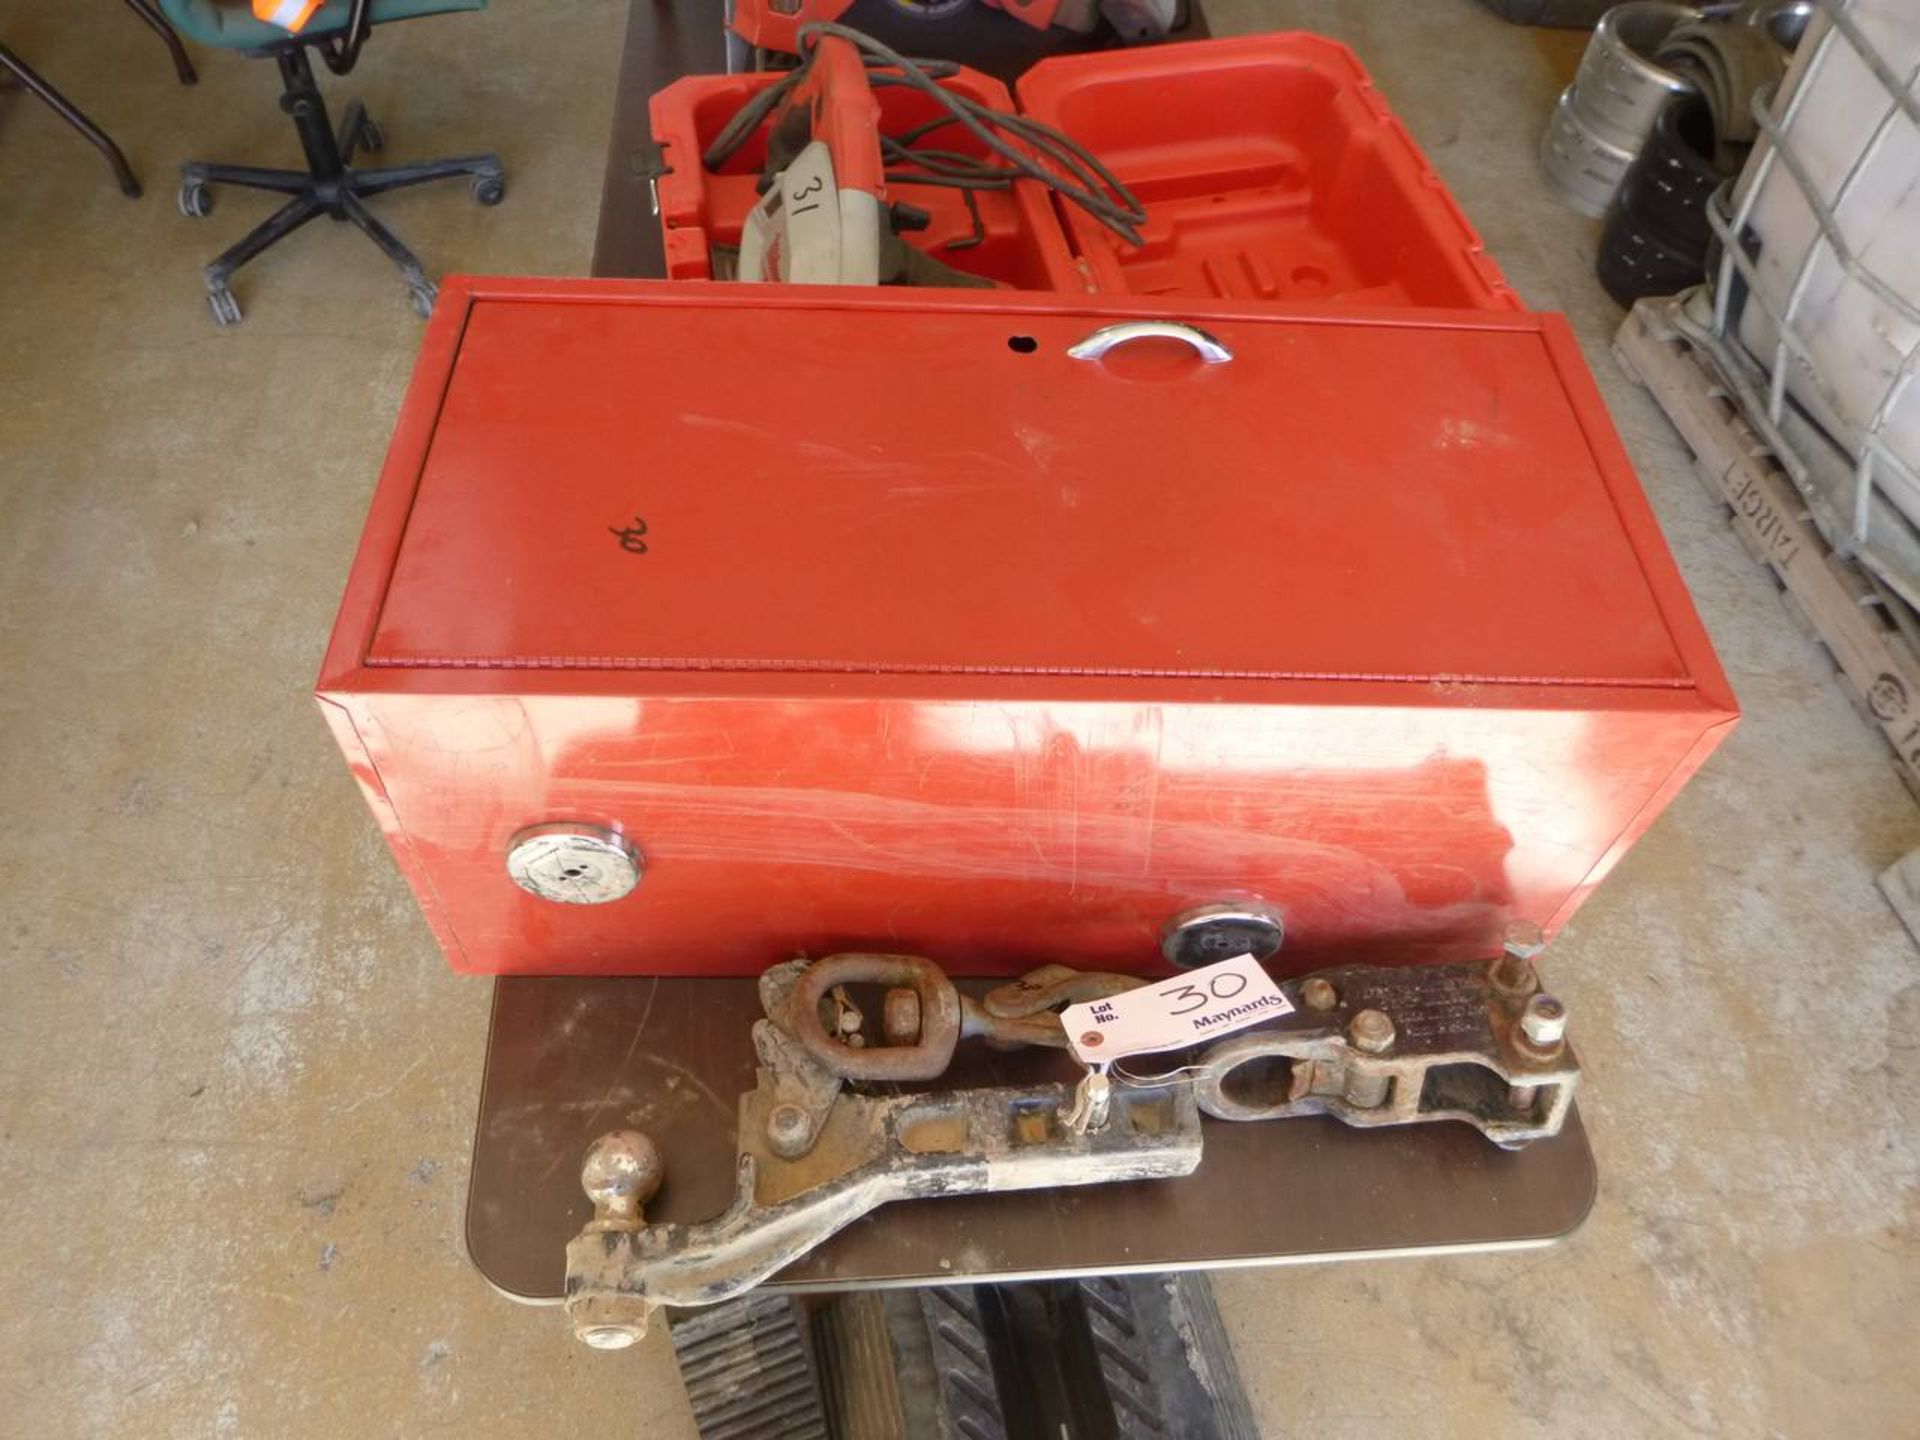 Tool box with chocks and hitch parts